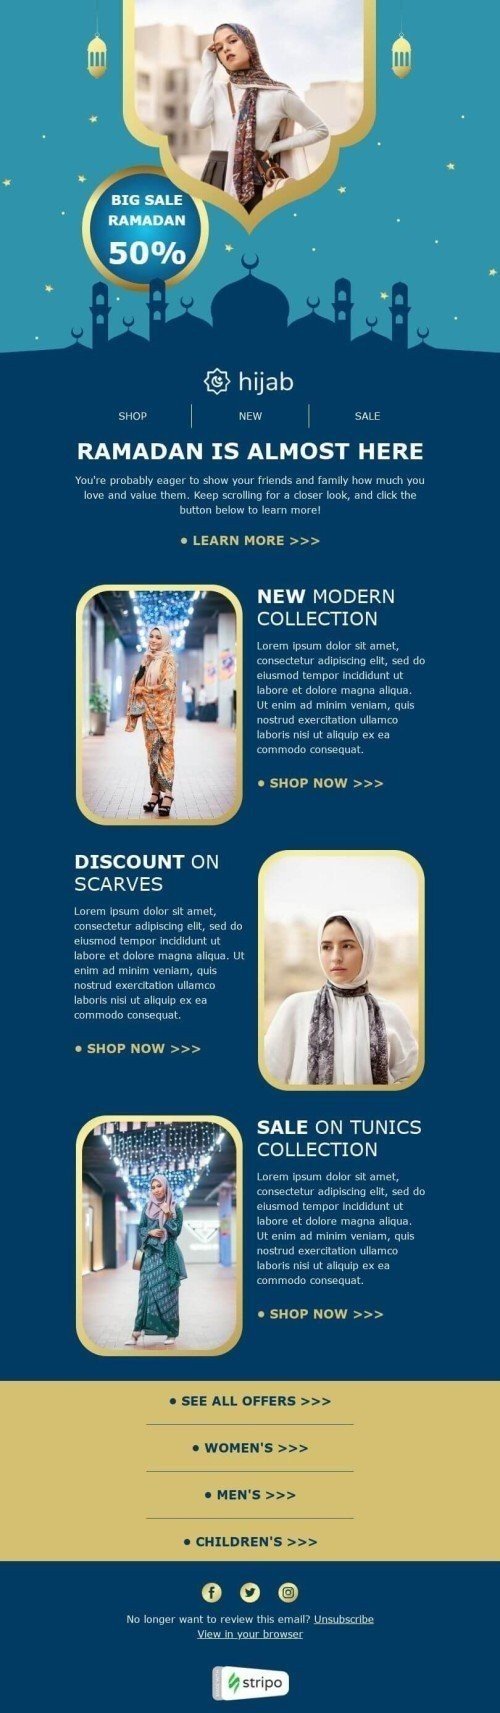 Ramadan Email Template "Hijab sale" for Fashion industry desktop view